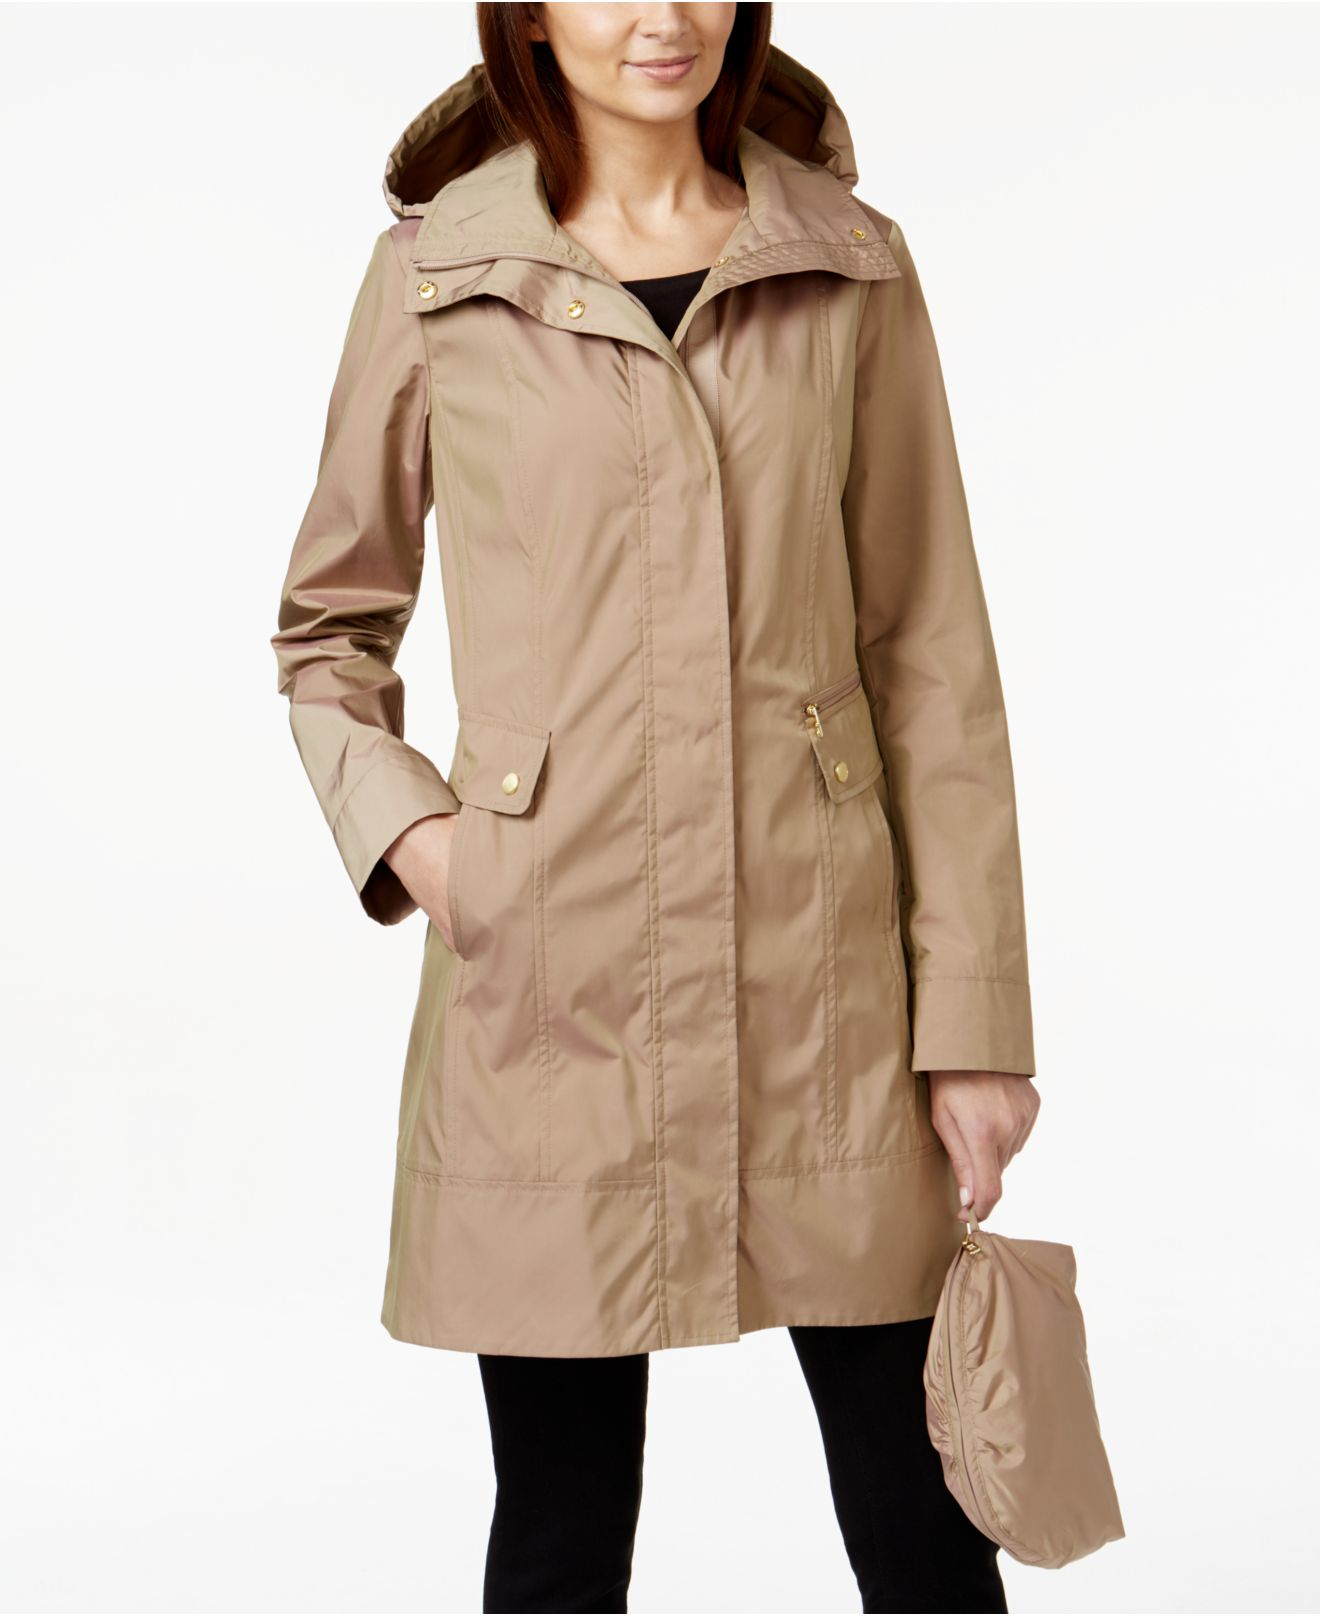 Cole haan Packable Hooded Raincoat in Natural | Lyst